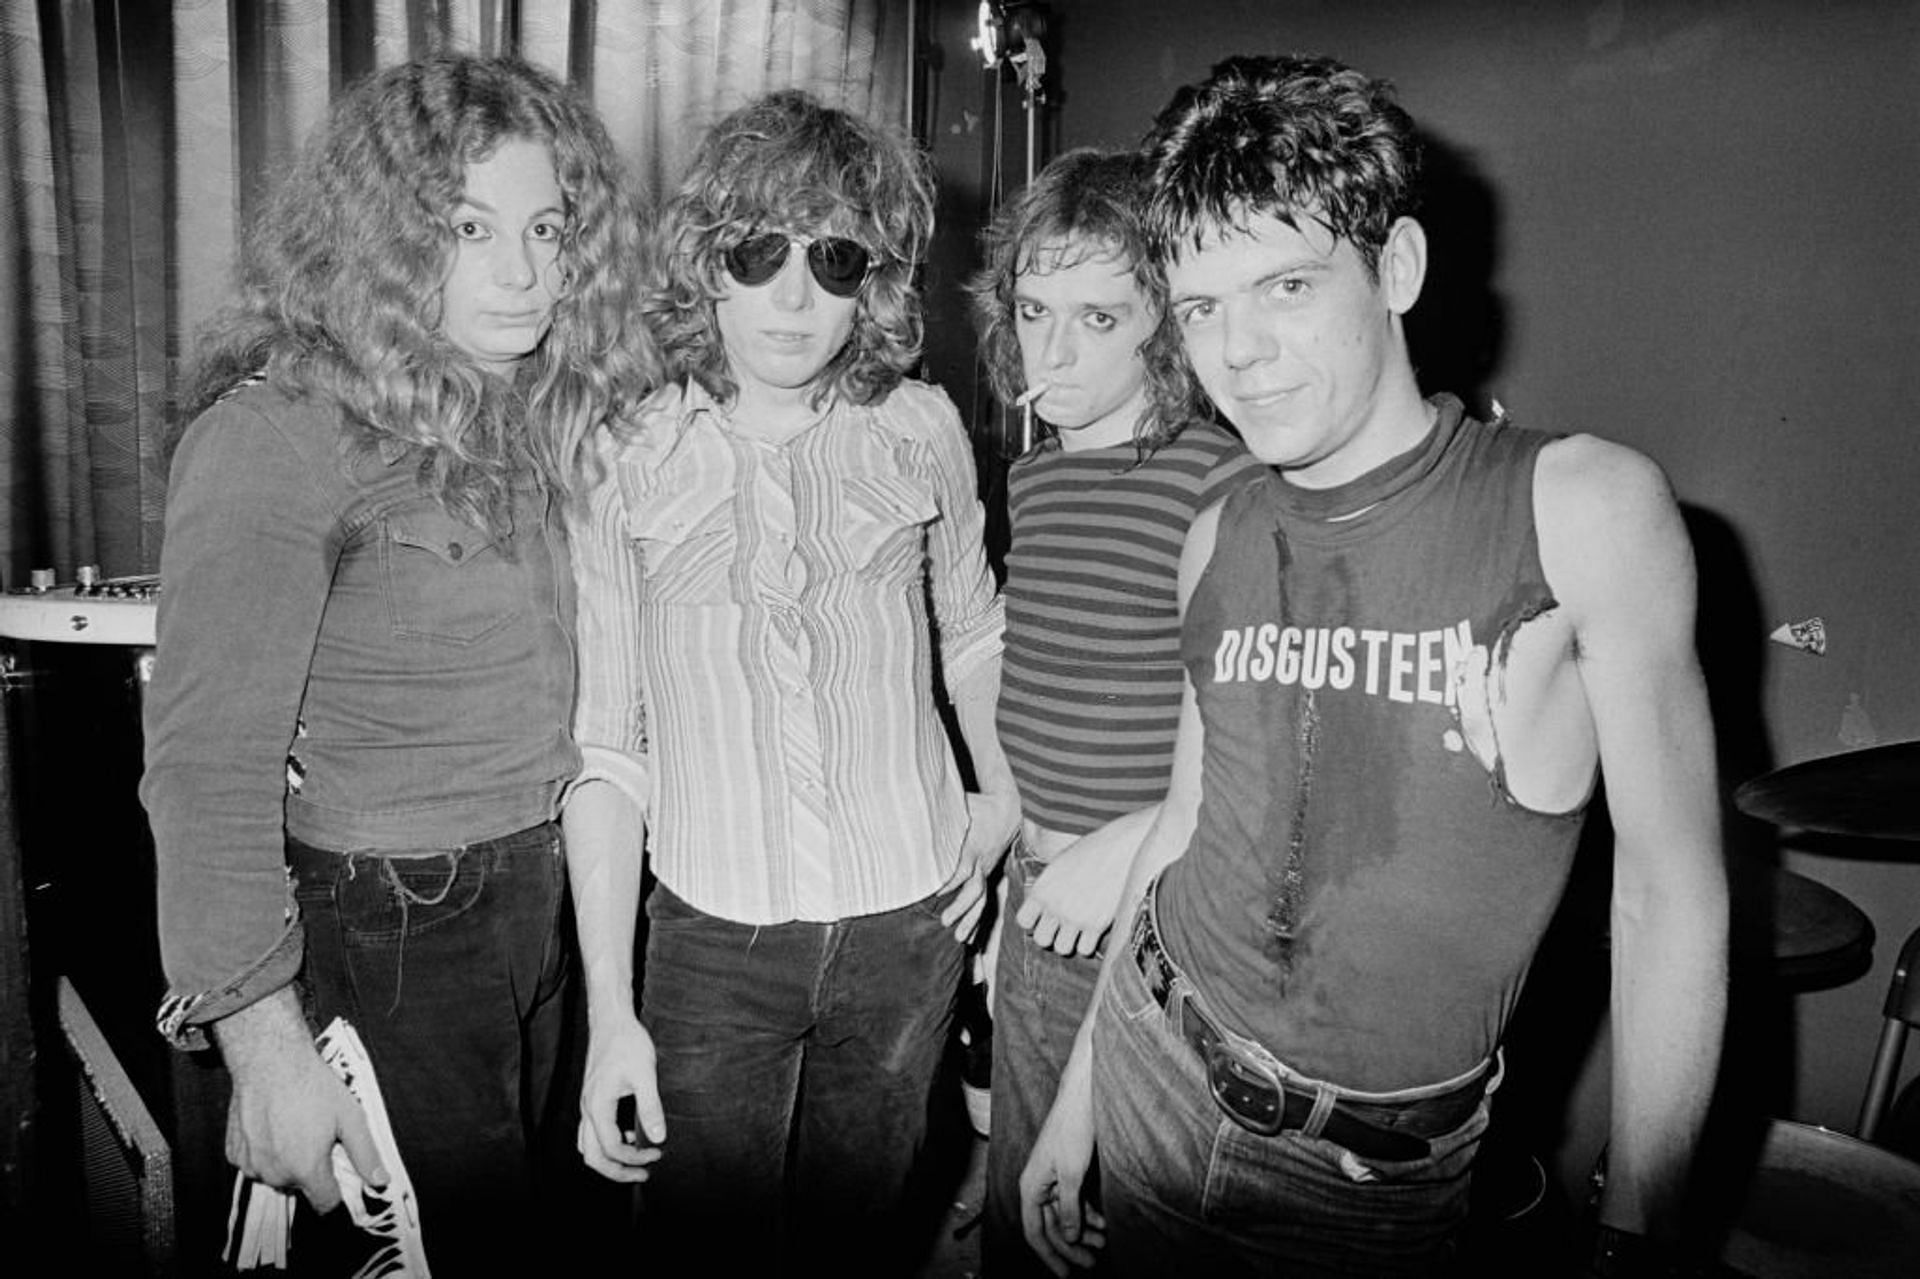 Gord Lewis was one of the founders of Teenage Head (Image via Erica Echenberg/Getty Images)